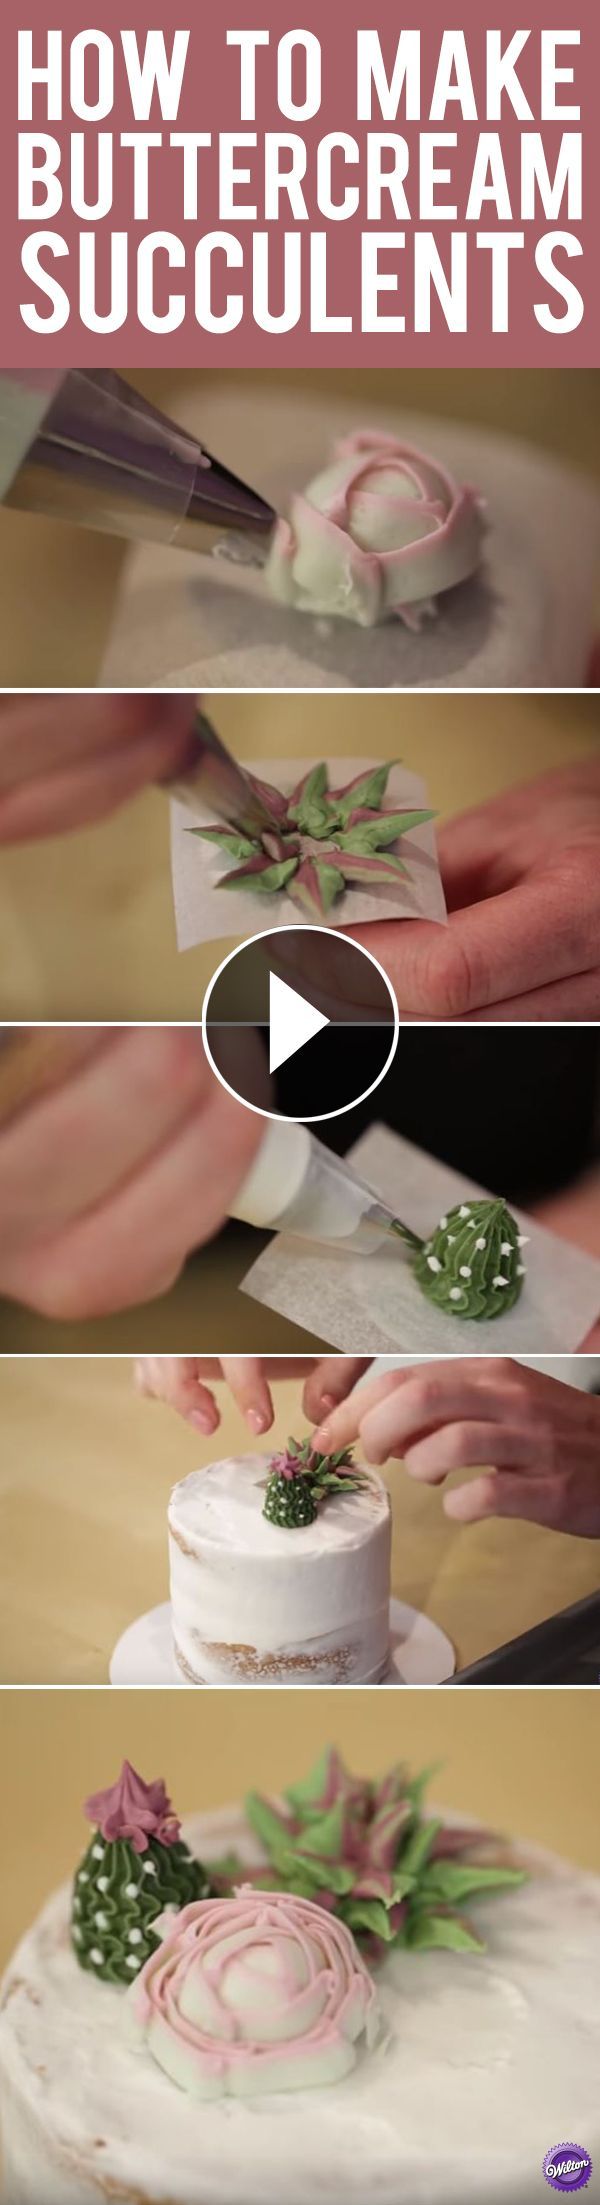 How to Make Buttercream Succulents – Learn how-to make 3 types of succulents in buttercream icing.  Great for tea parties,